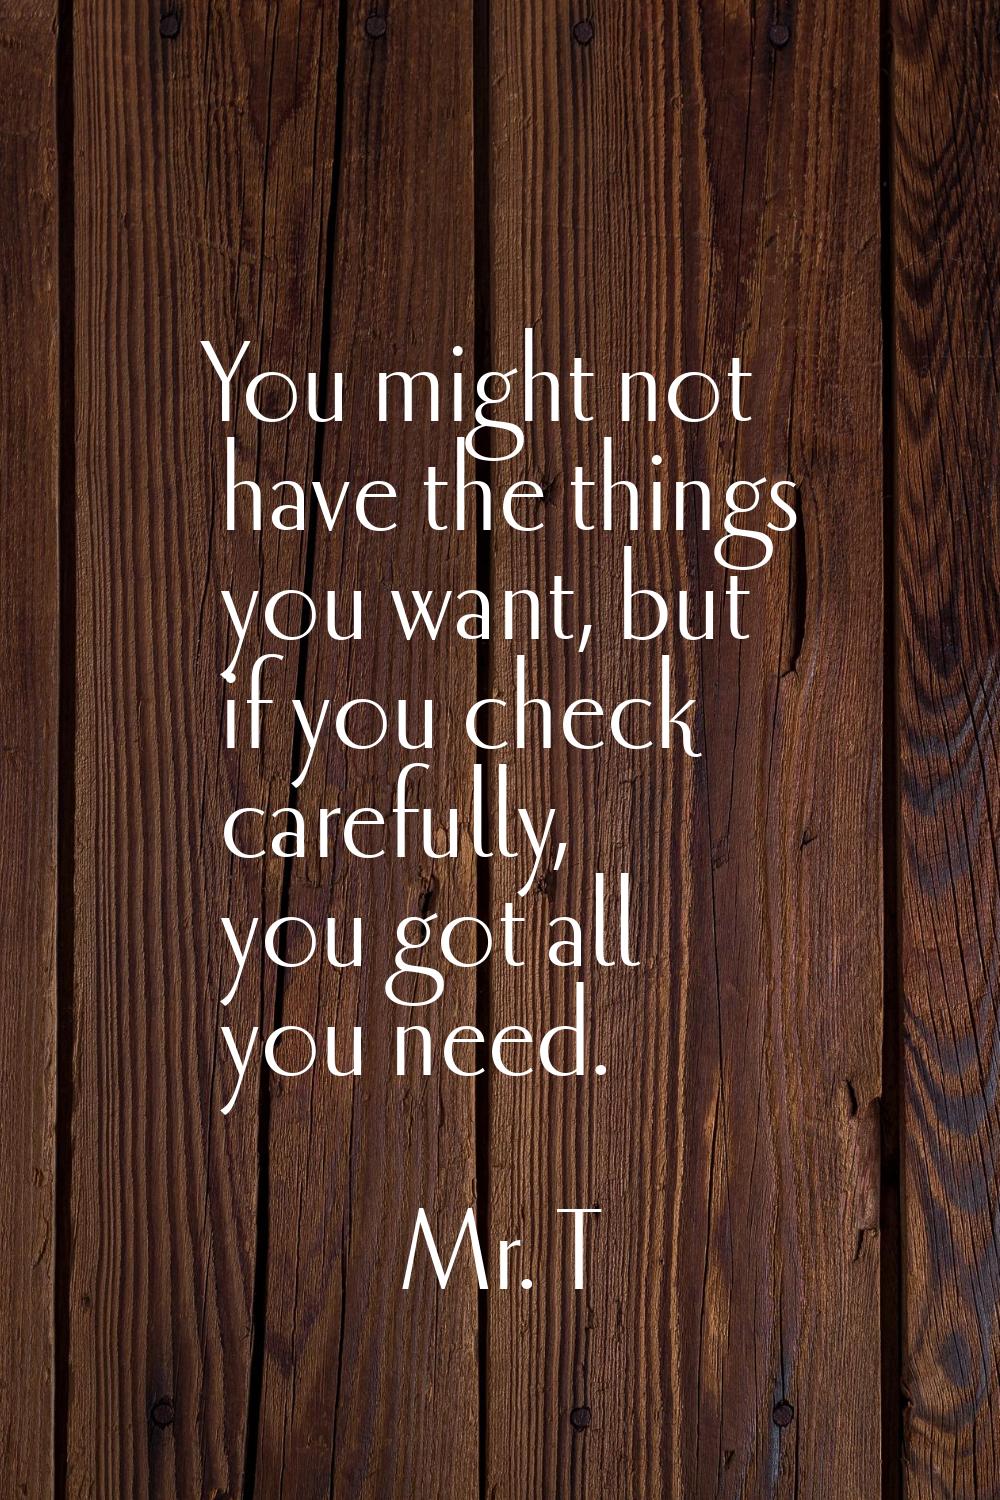 You might not have the things you want, but if you check carefully, you got all you need.